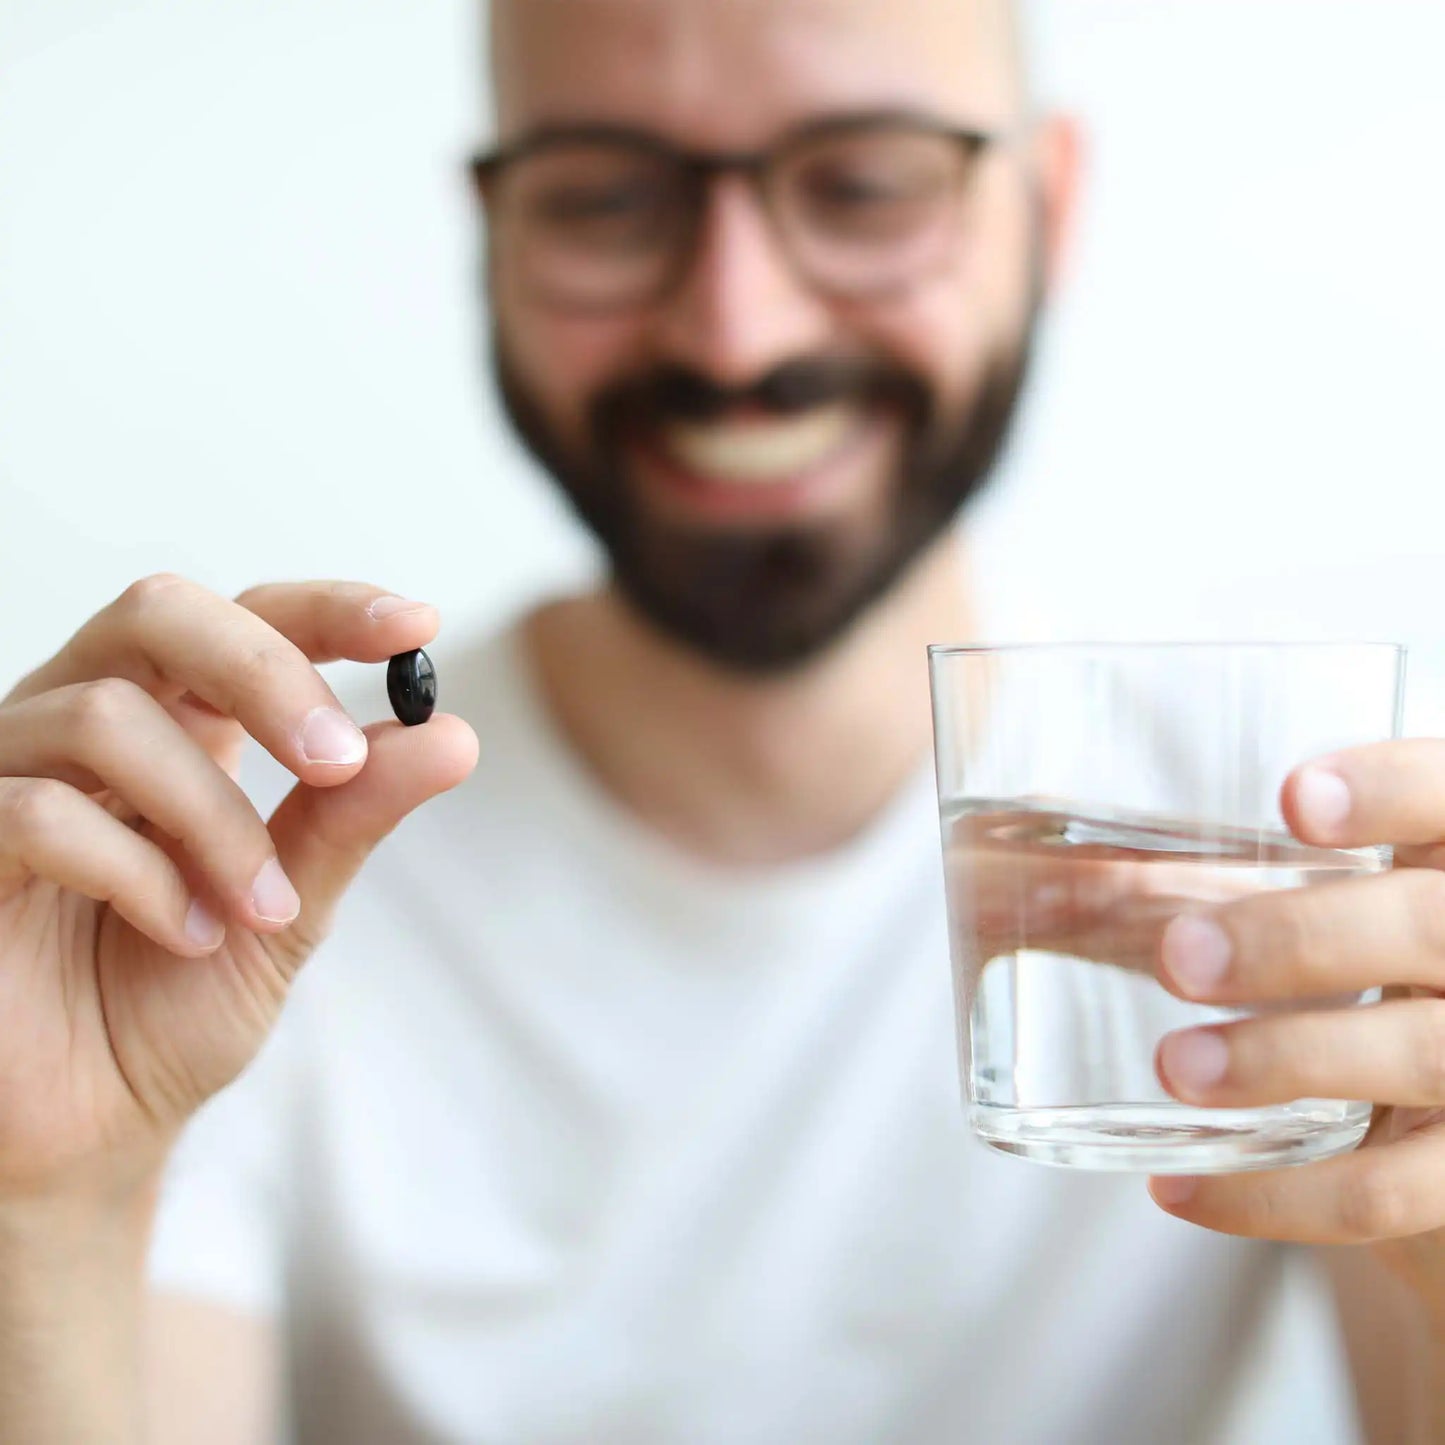 The client holds a glass of water and a soft gelatine capsule in his hands.